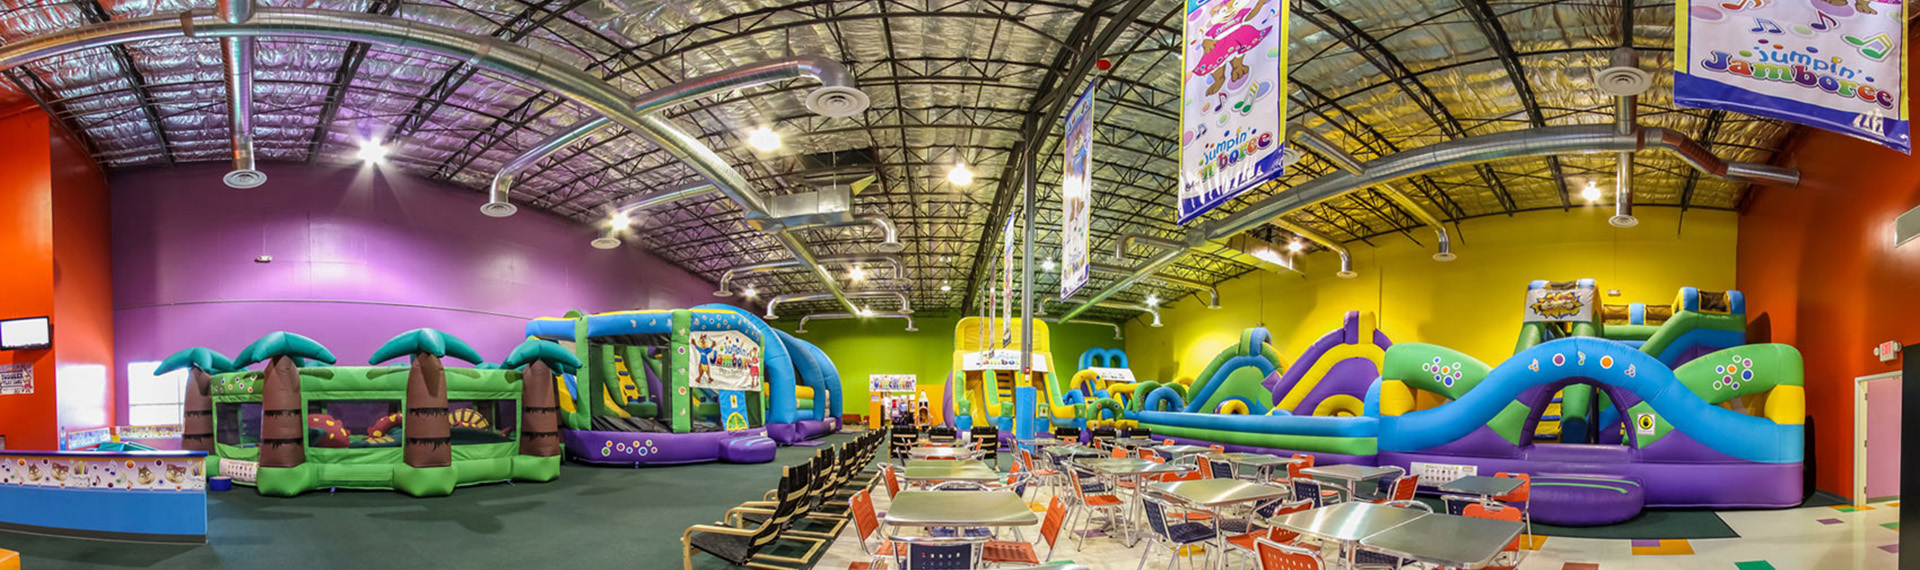 Inflatable Party Centers